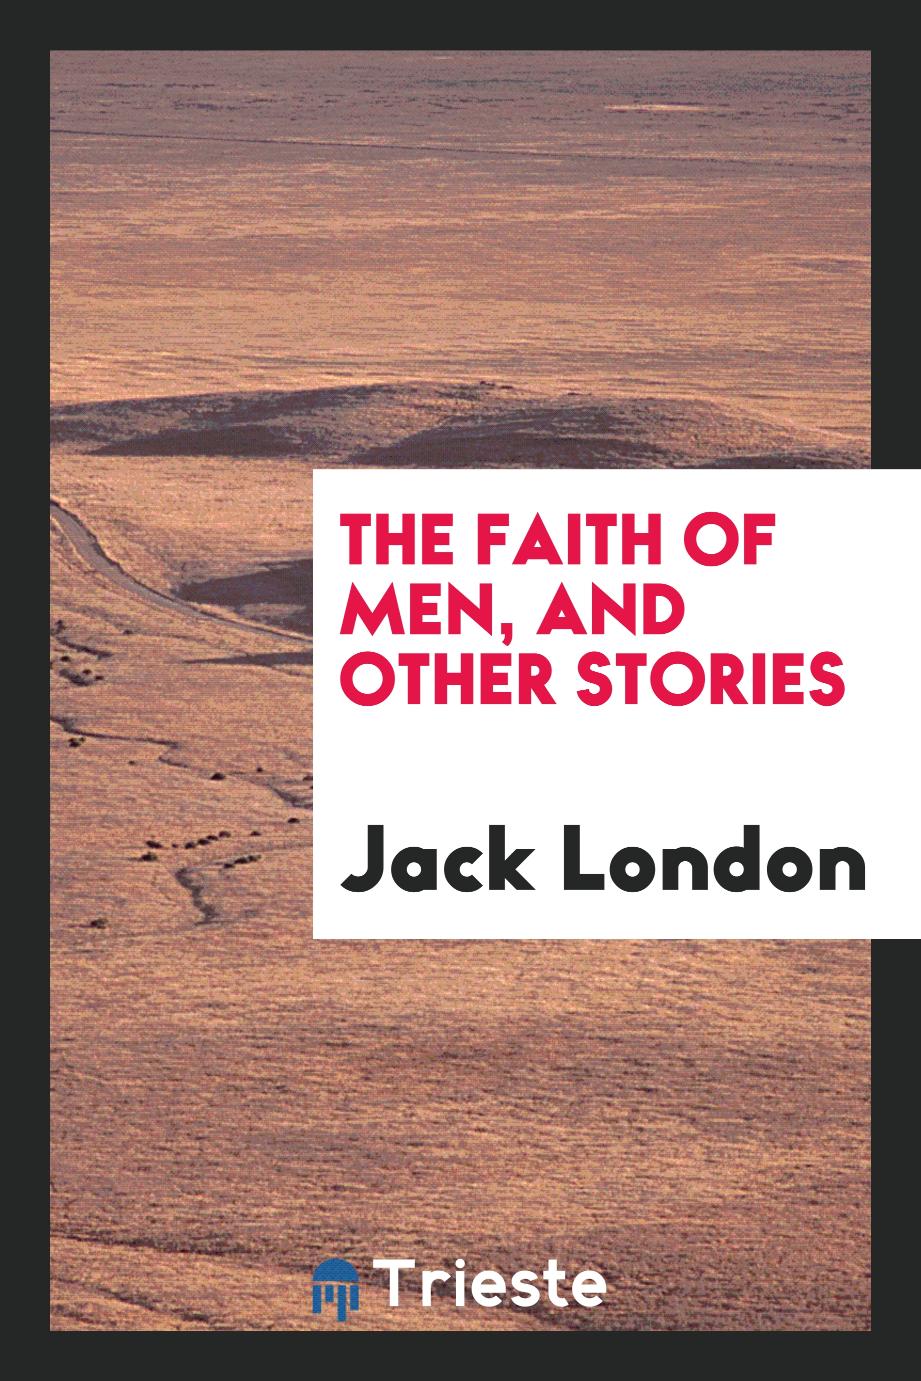 The faith of men, and other stories